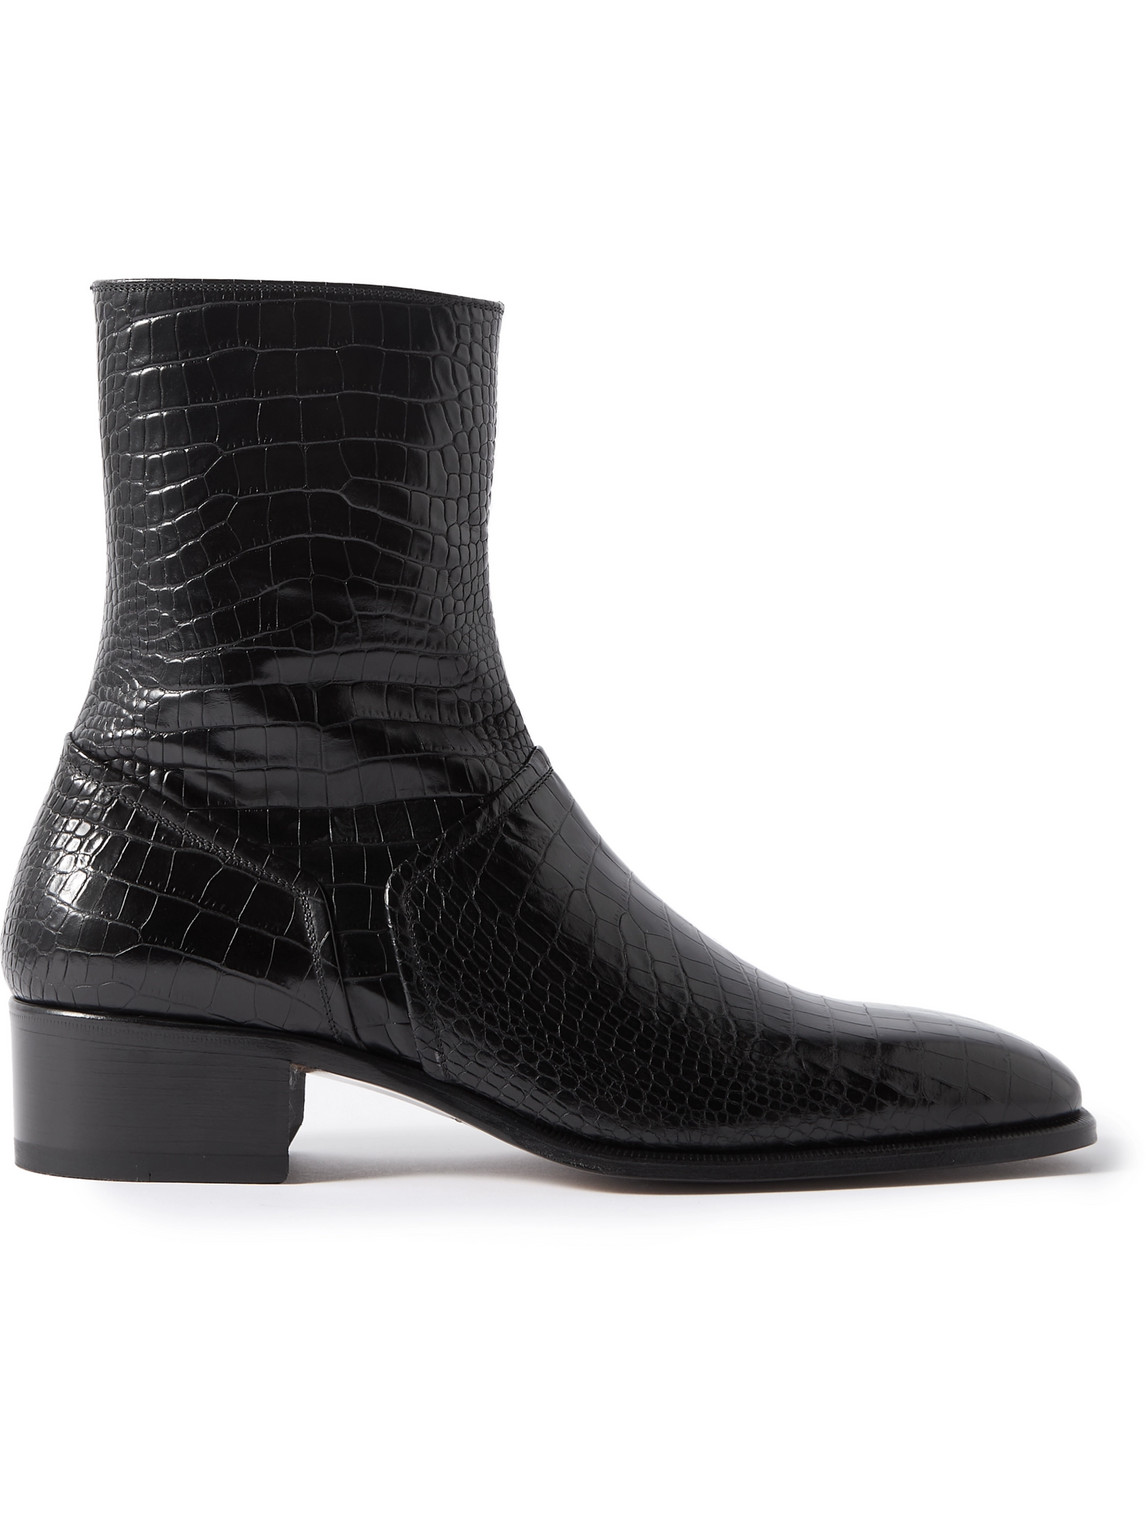 TOM FORD ALEC CROC-EFFECT LEATHER ANKLE BOOTS